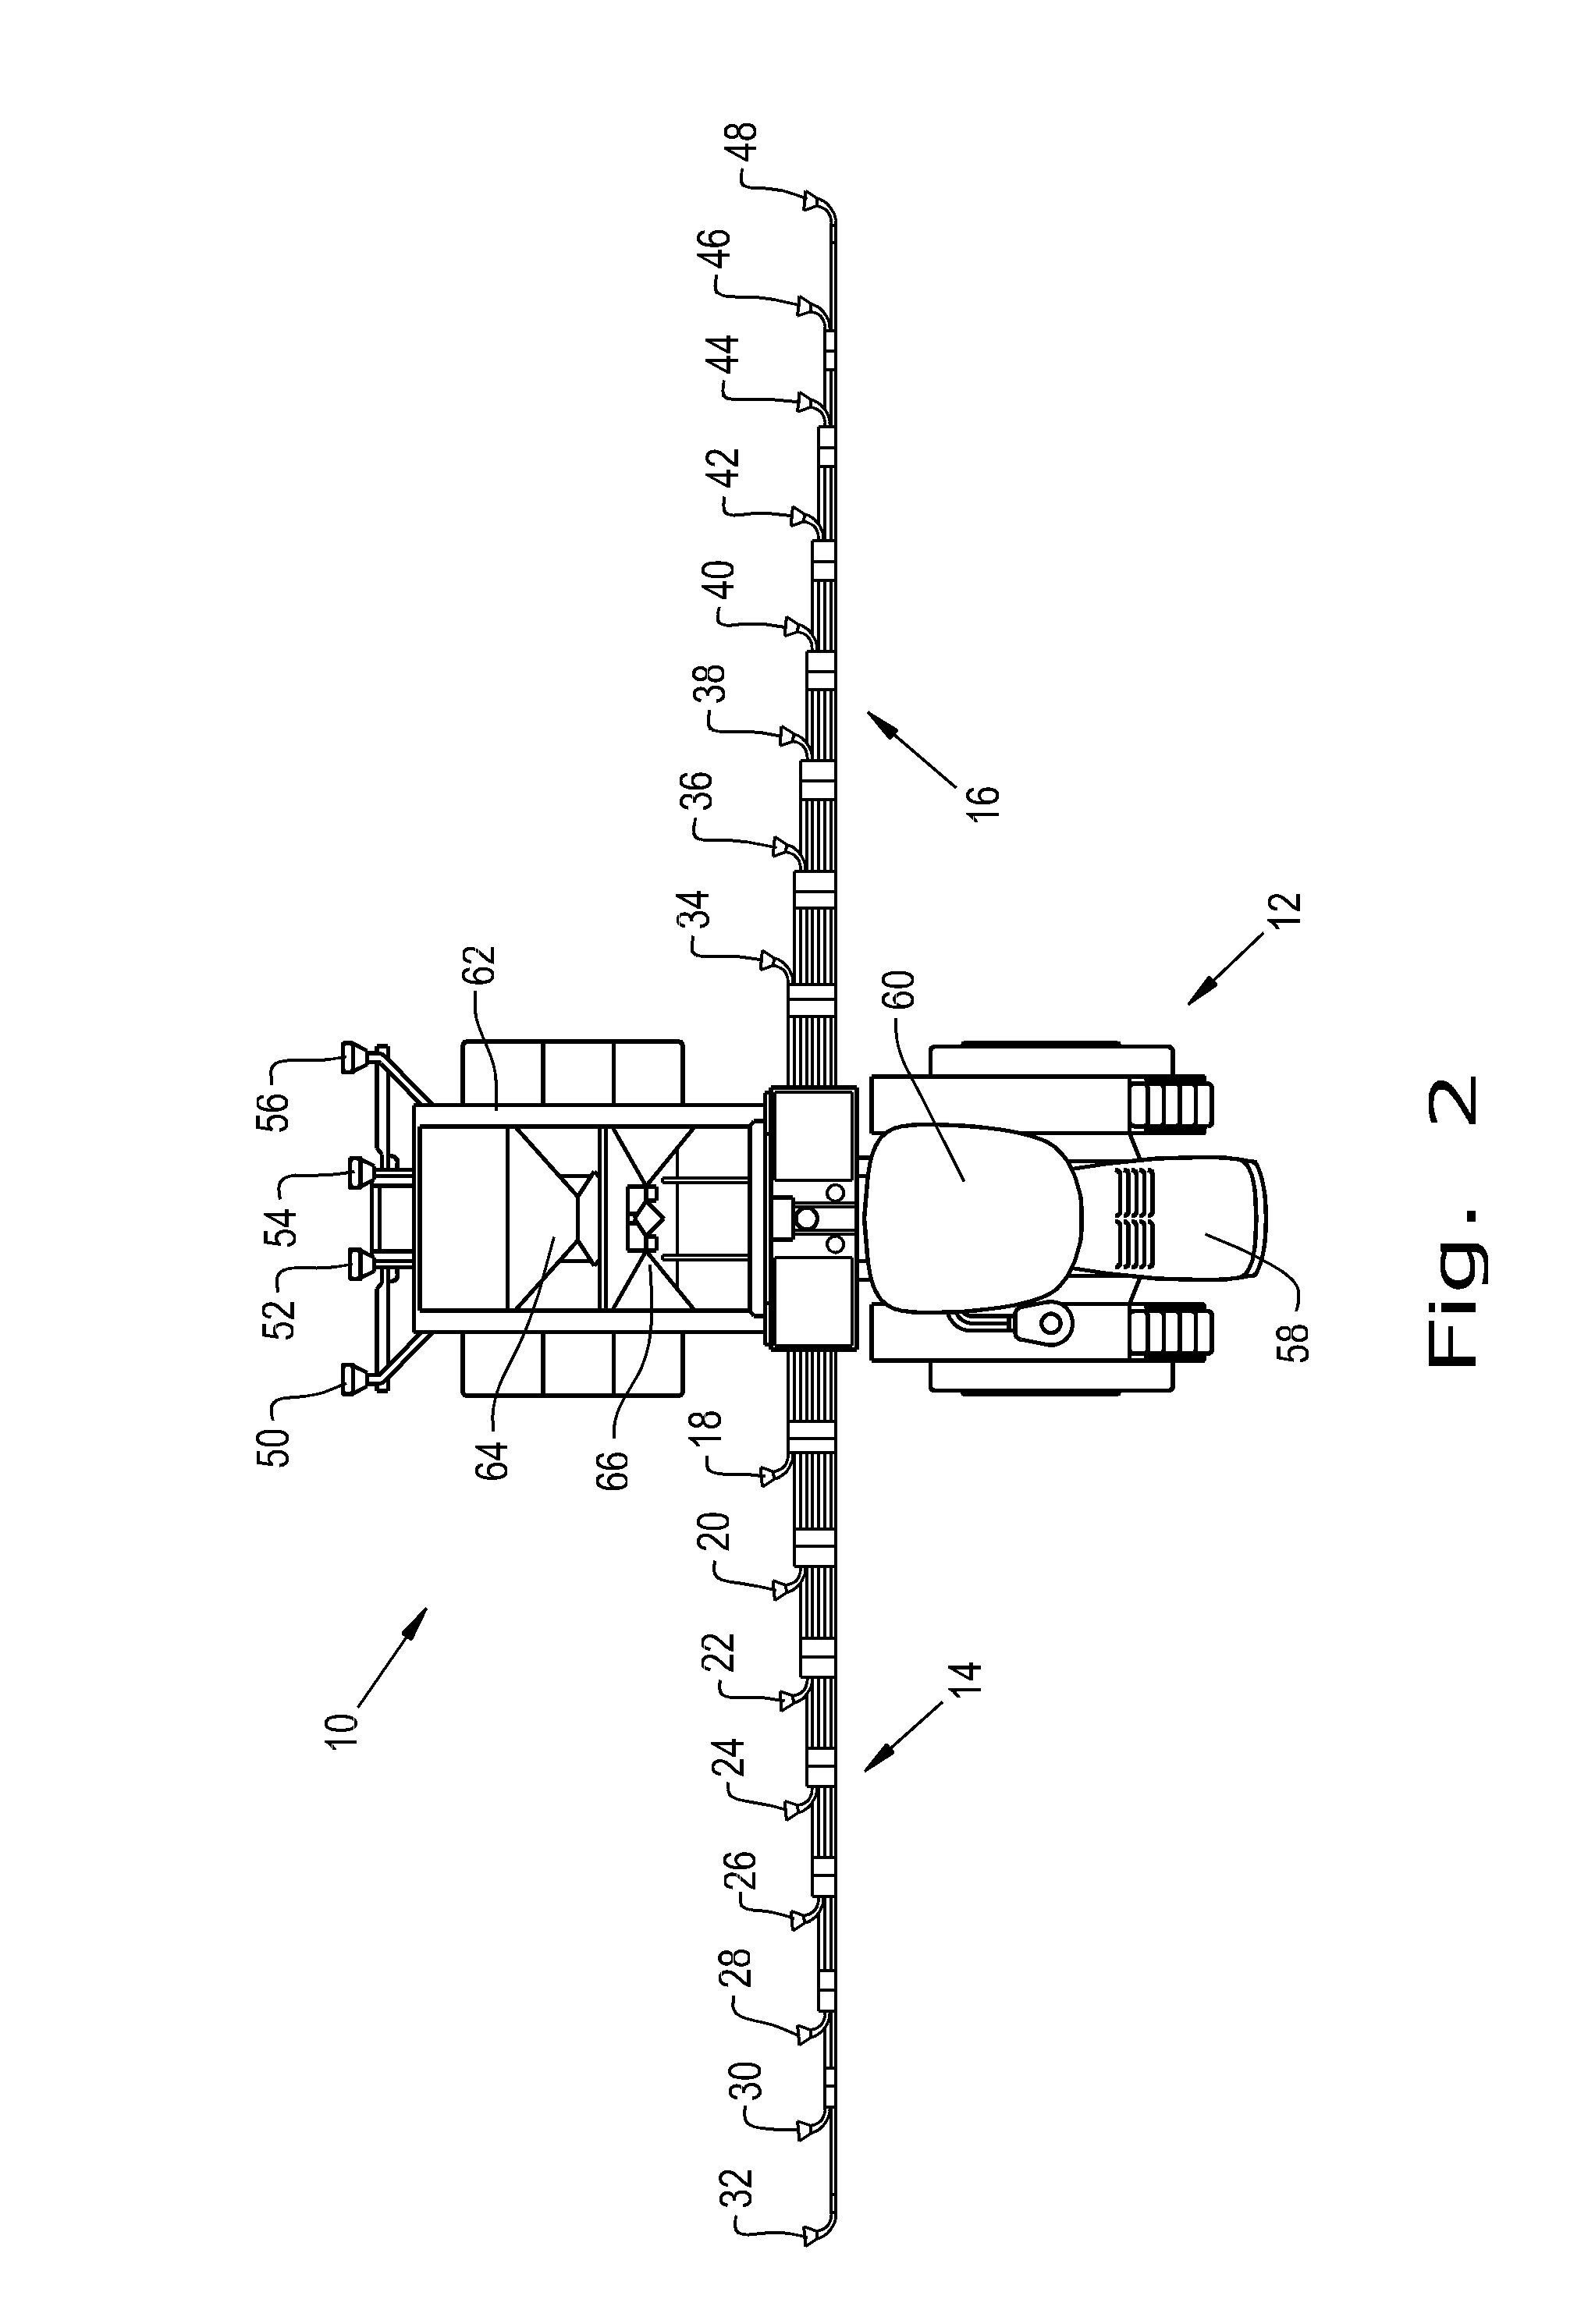 Pheumatic delivery system for application implement using multiple metering devices